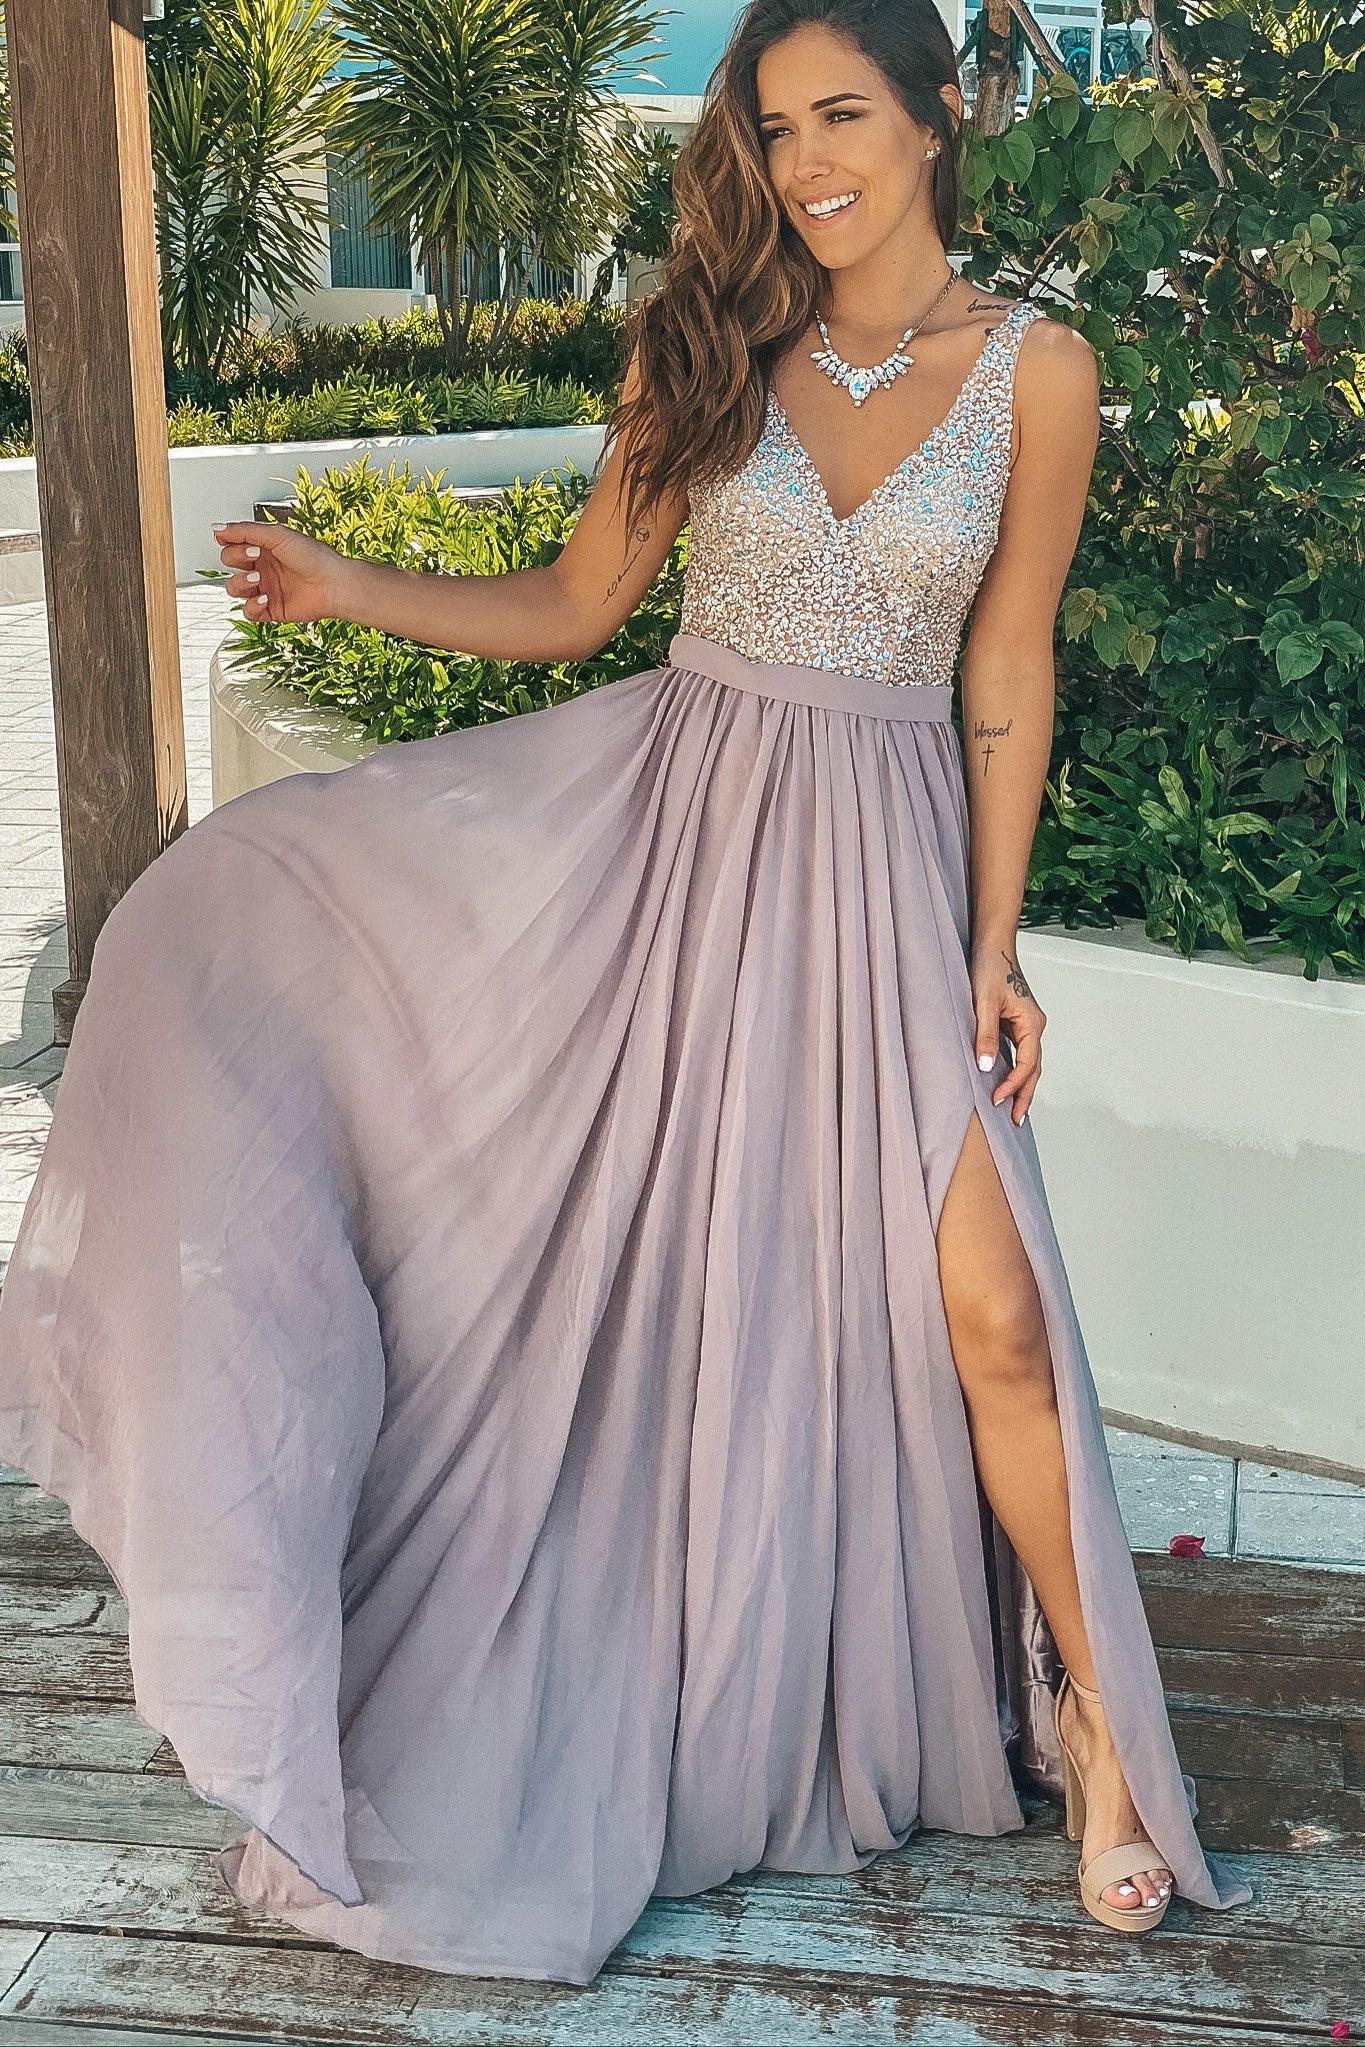 Taupe Maxi Dress with Silver Jewels